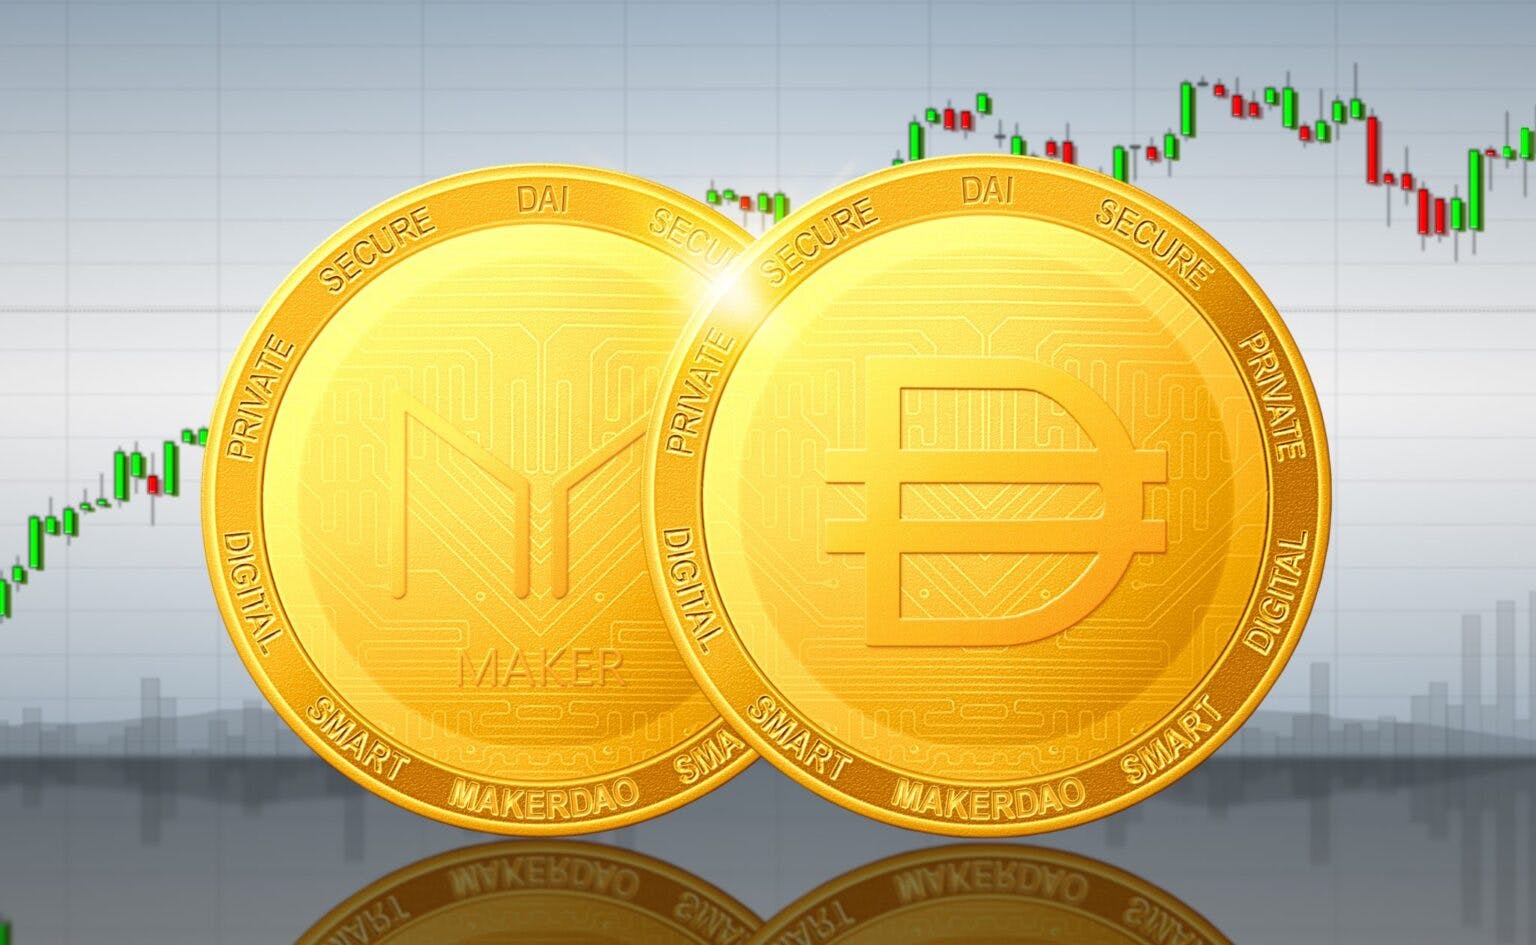 makerdao-dai-cryptocurrency-makerdao-dai-golden-coins-on-the-background-of-the-chart-stockpack-deposit-photos-scaled-1-1536x945.jpg